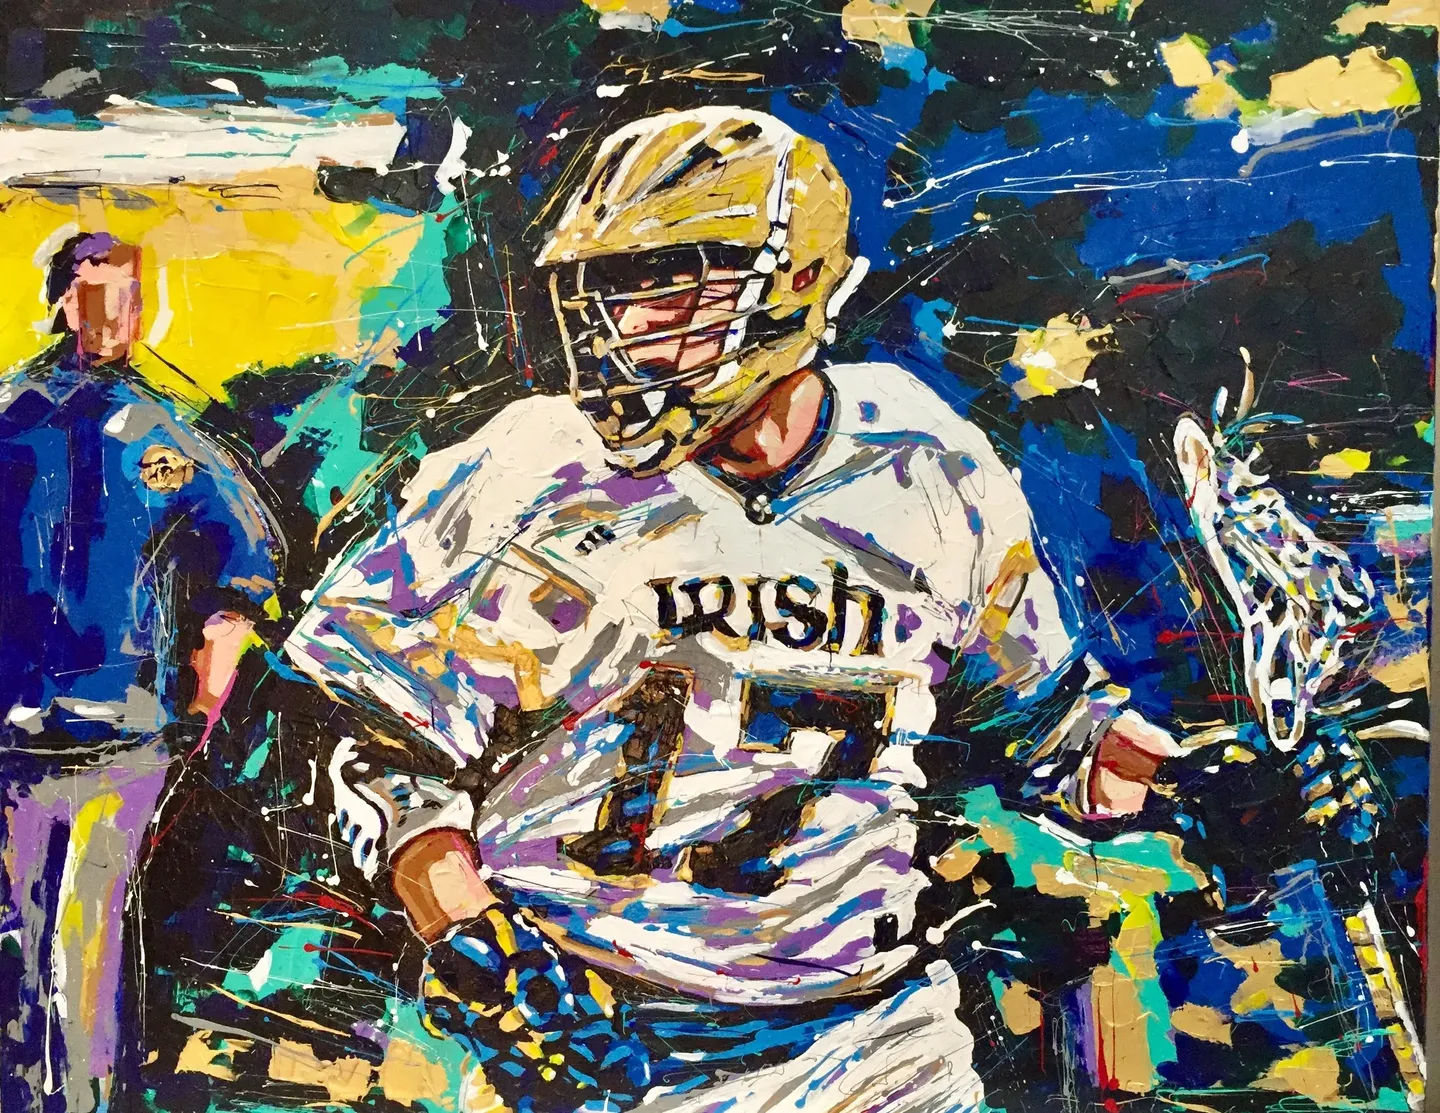 A painting of a lacrosse player in uniform.